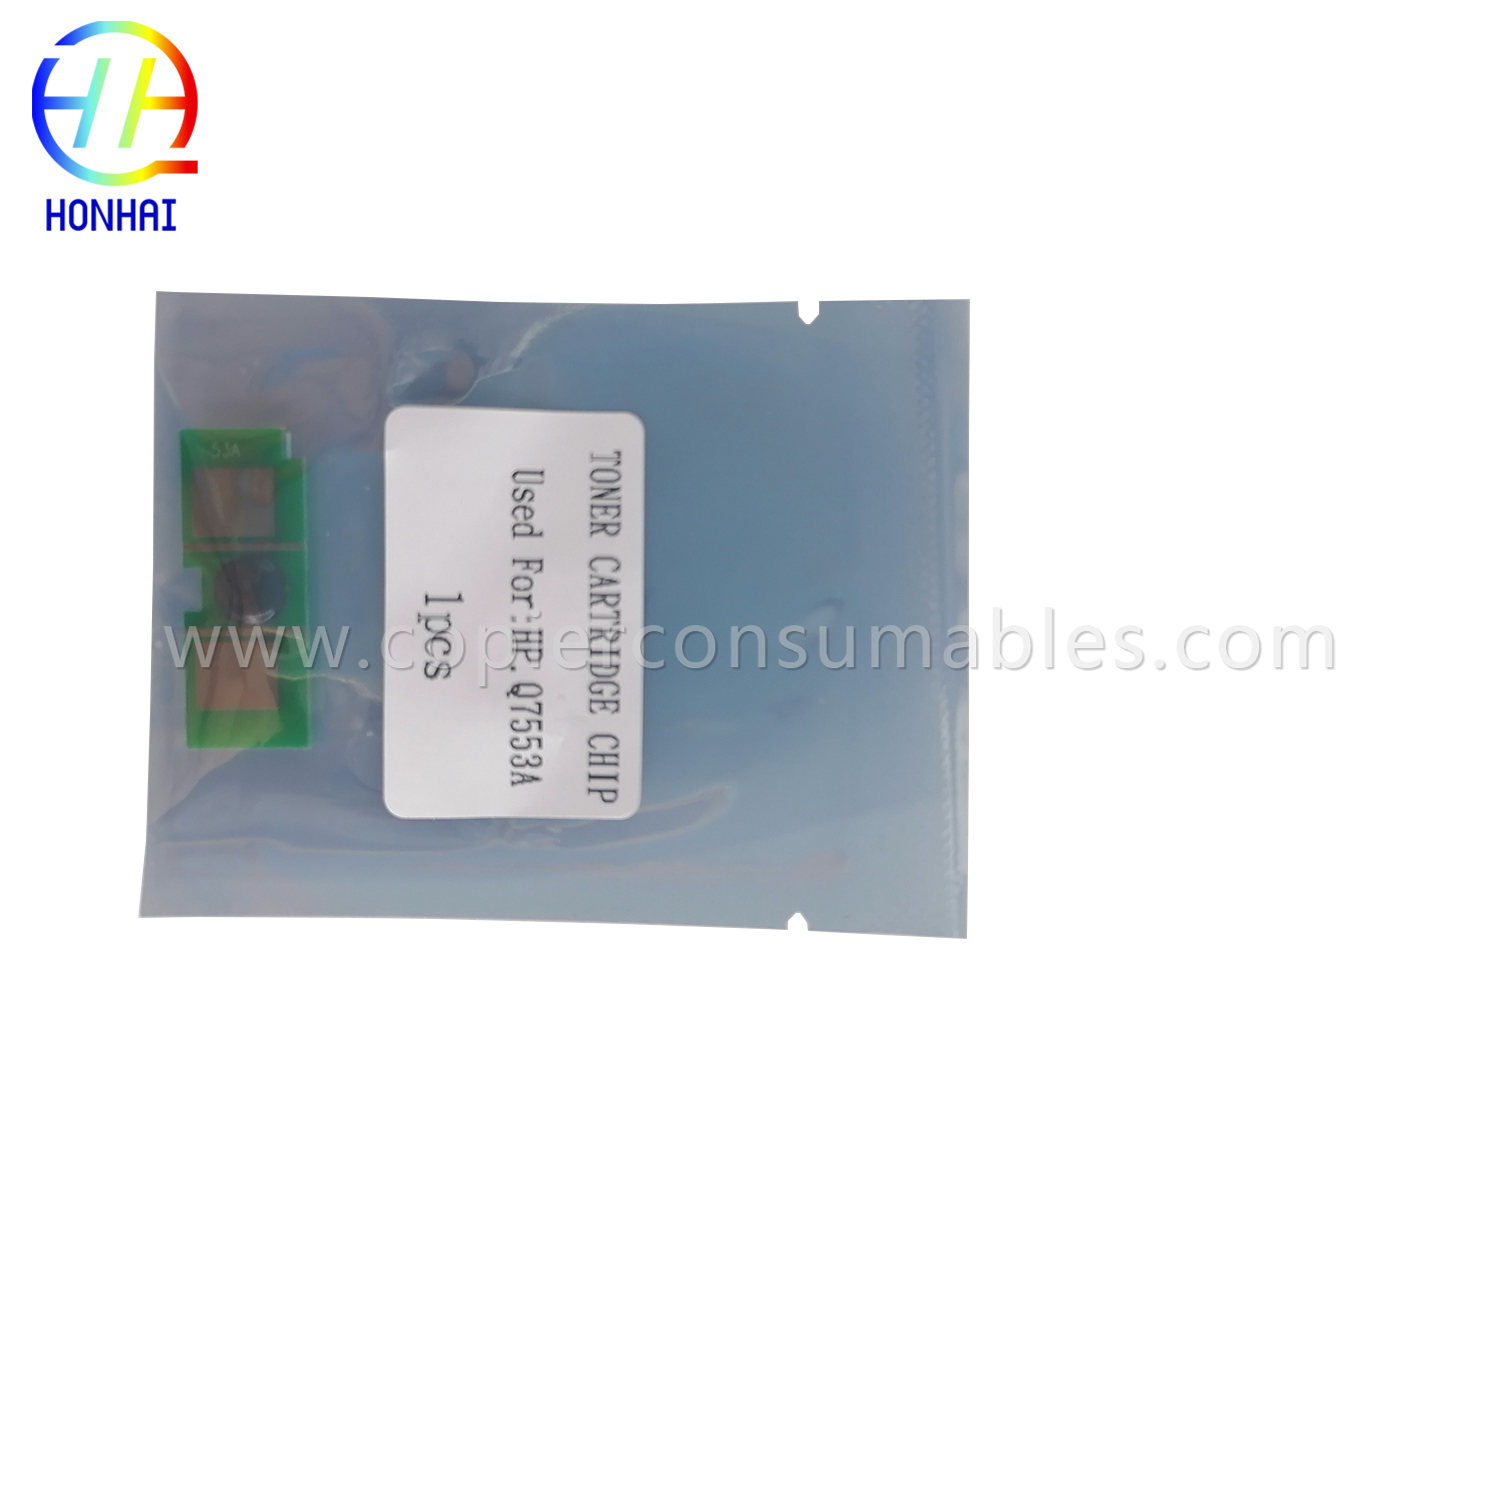 Toner Chip for HP 2015 Q7553A